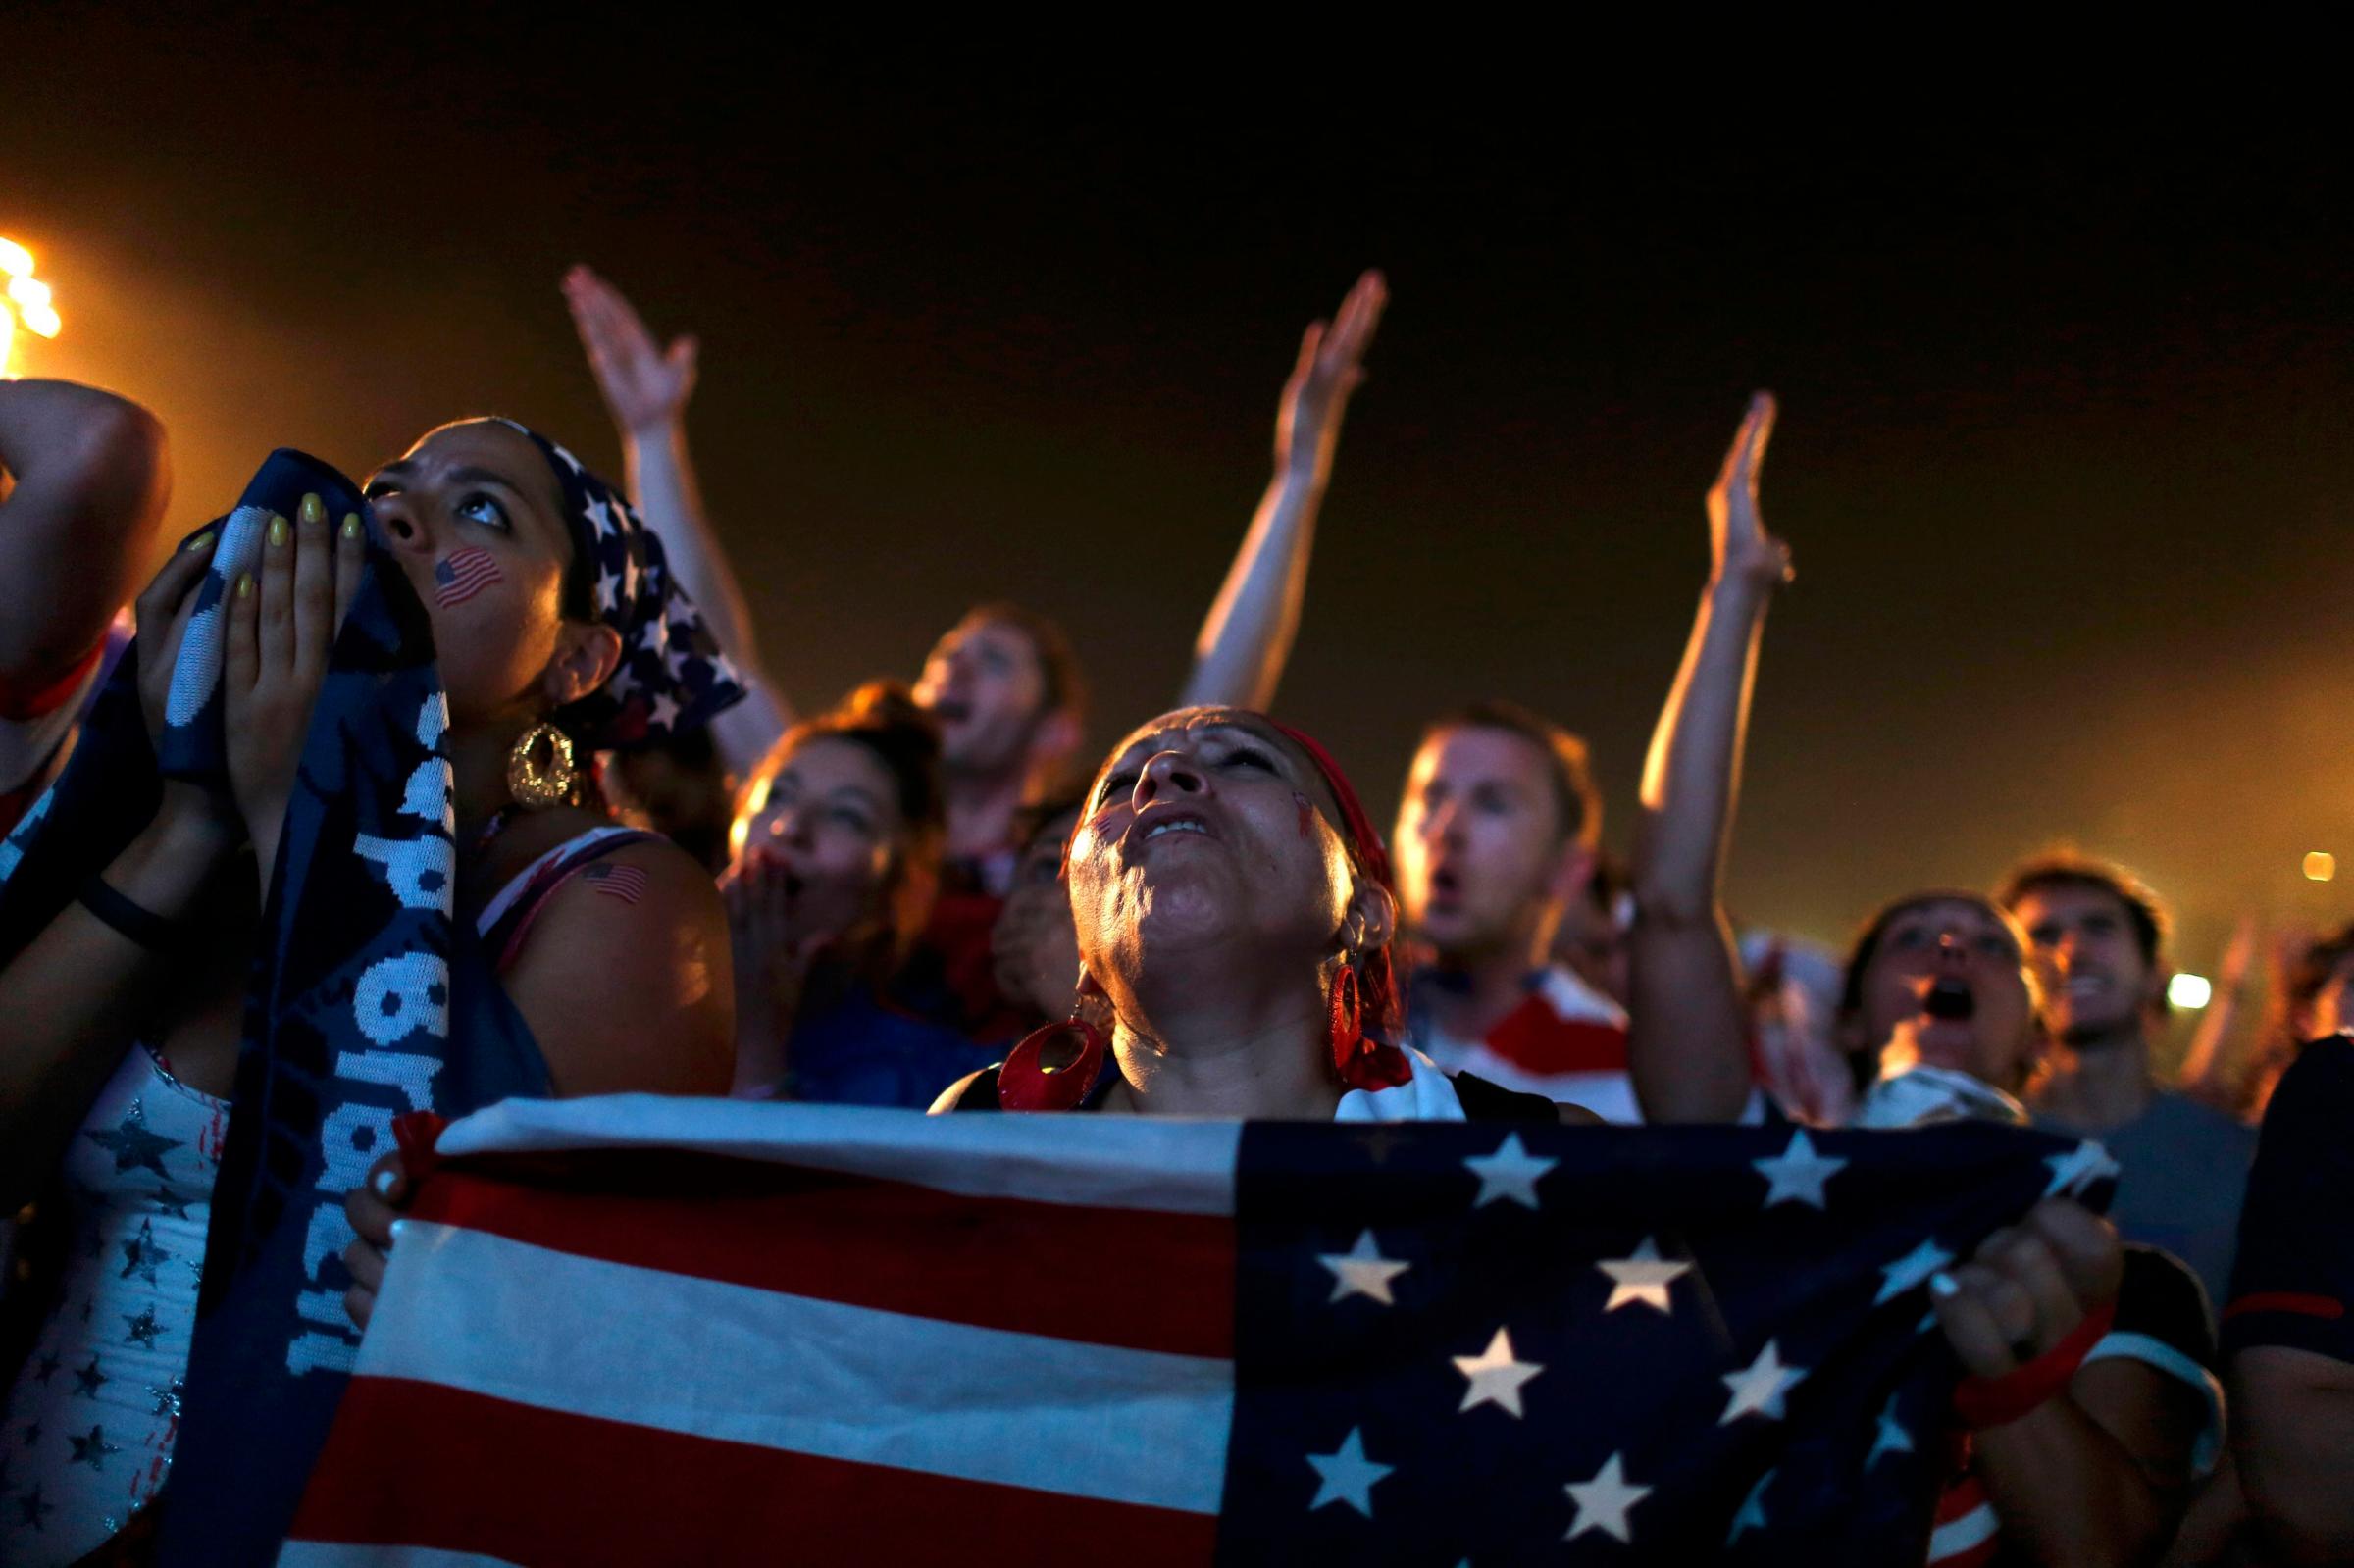 U.S. soccer fans react  as they watch the 2014 World Cup soccer match between U.S. and Ghana on a large screen at Copacabana beach in Rio de Janeiro